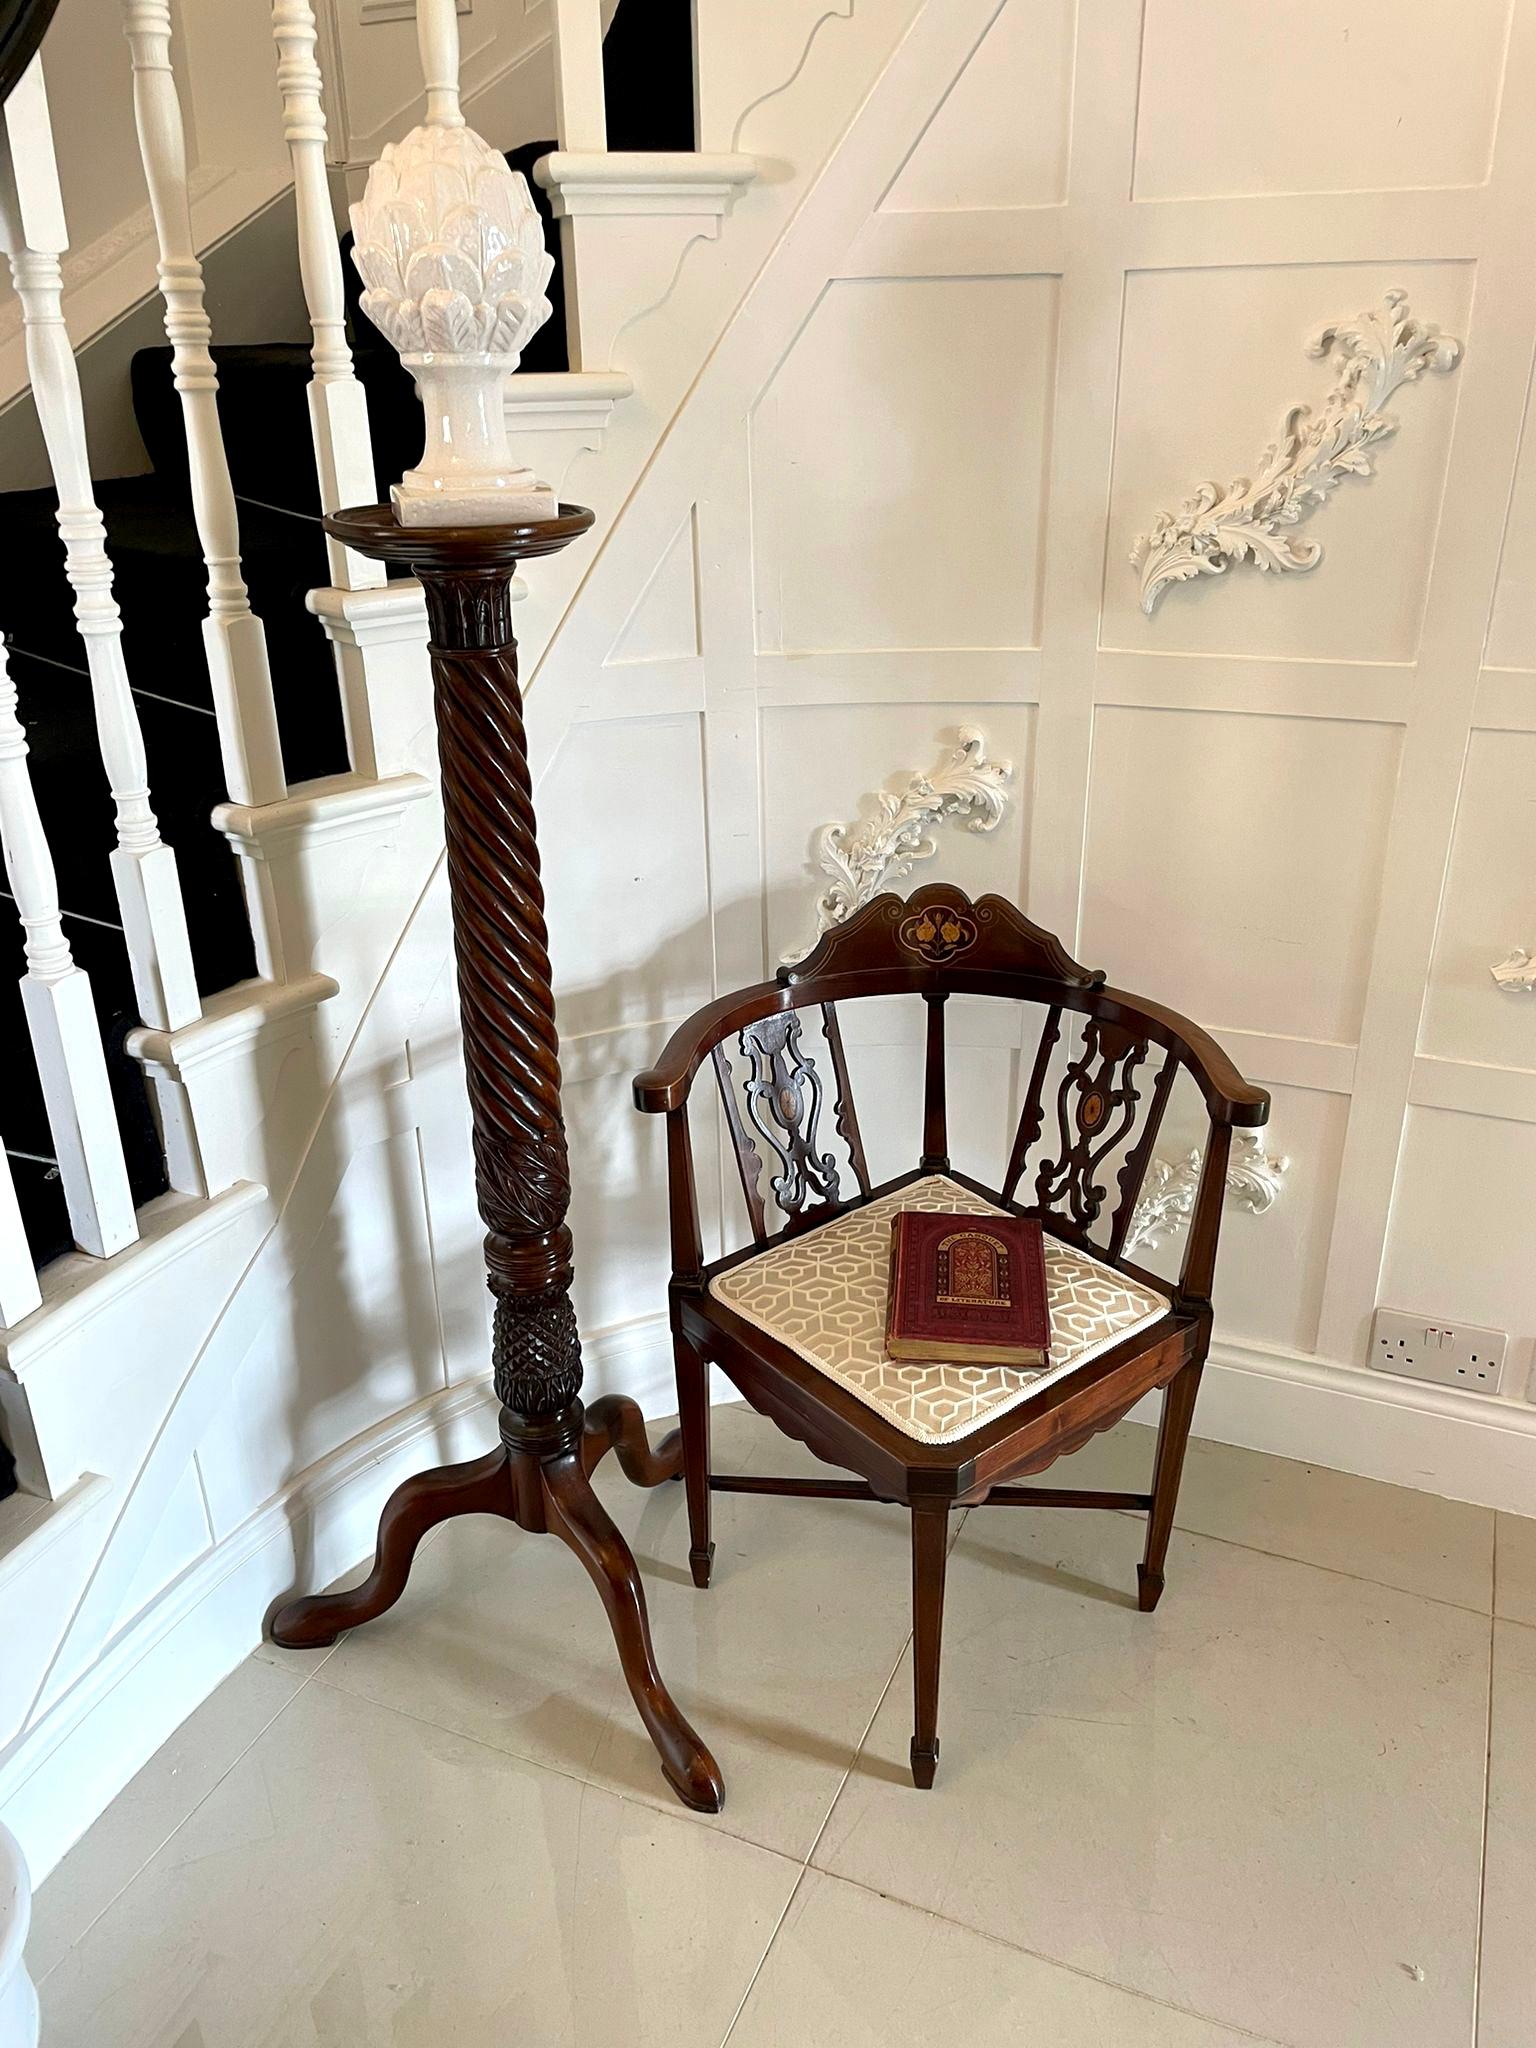 Quality Edwardian antique mahogany inlaid corner chair. This is a very attractive chair in perfect condition having a lovely quality shaped back with satinwood inlay, newly recovered seat, standing on turned tapering legs united by a turned cross